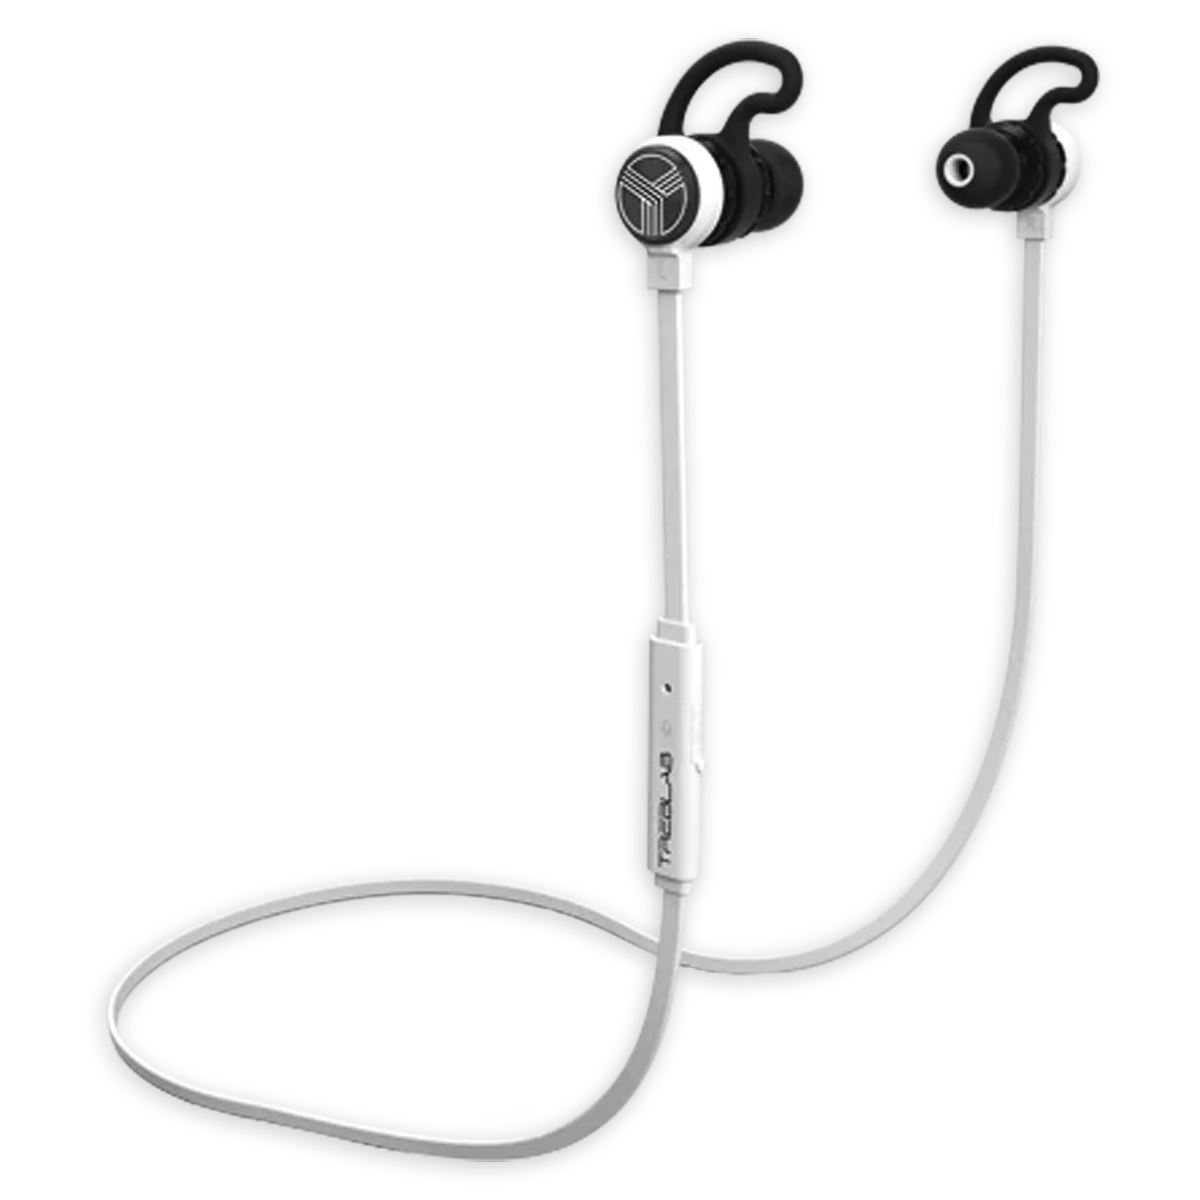 TREBLAB J1 - Best Affordable Sports Earbuds with Ear Hooks